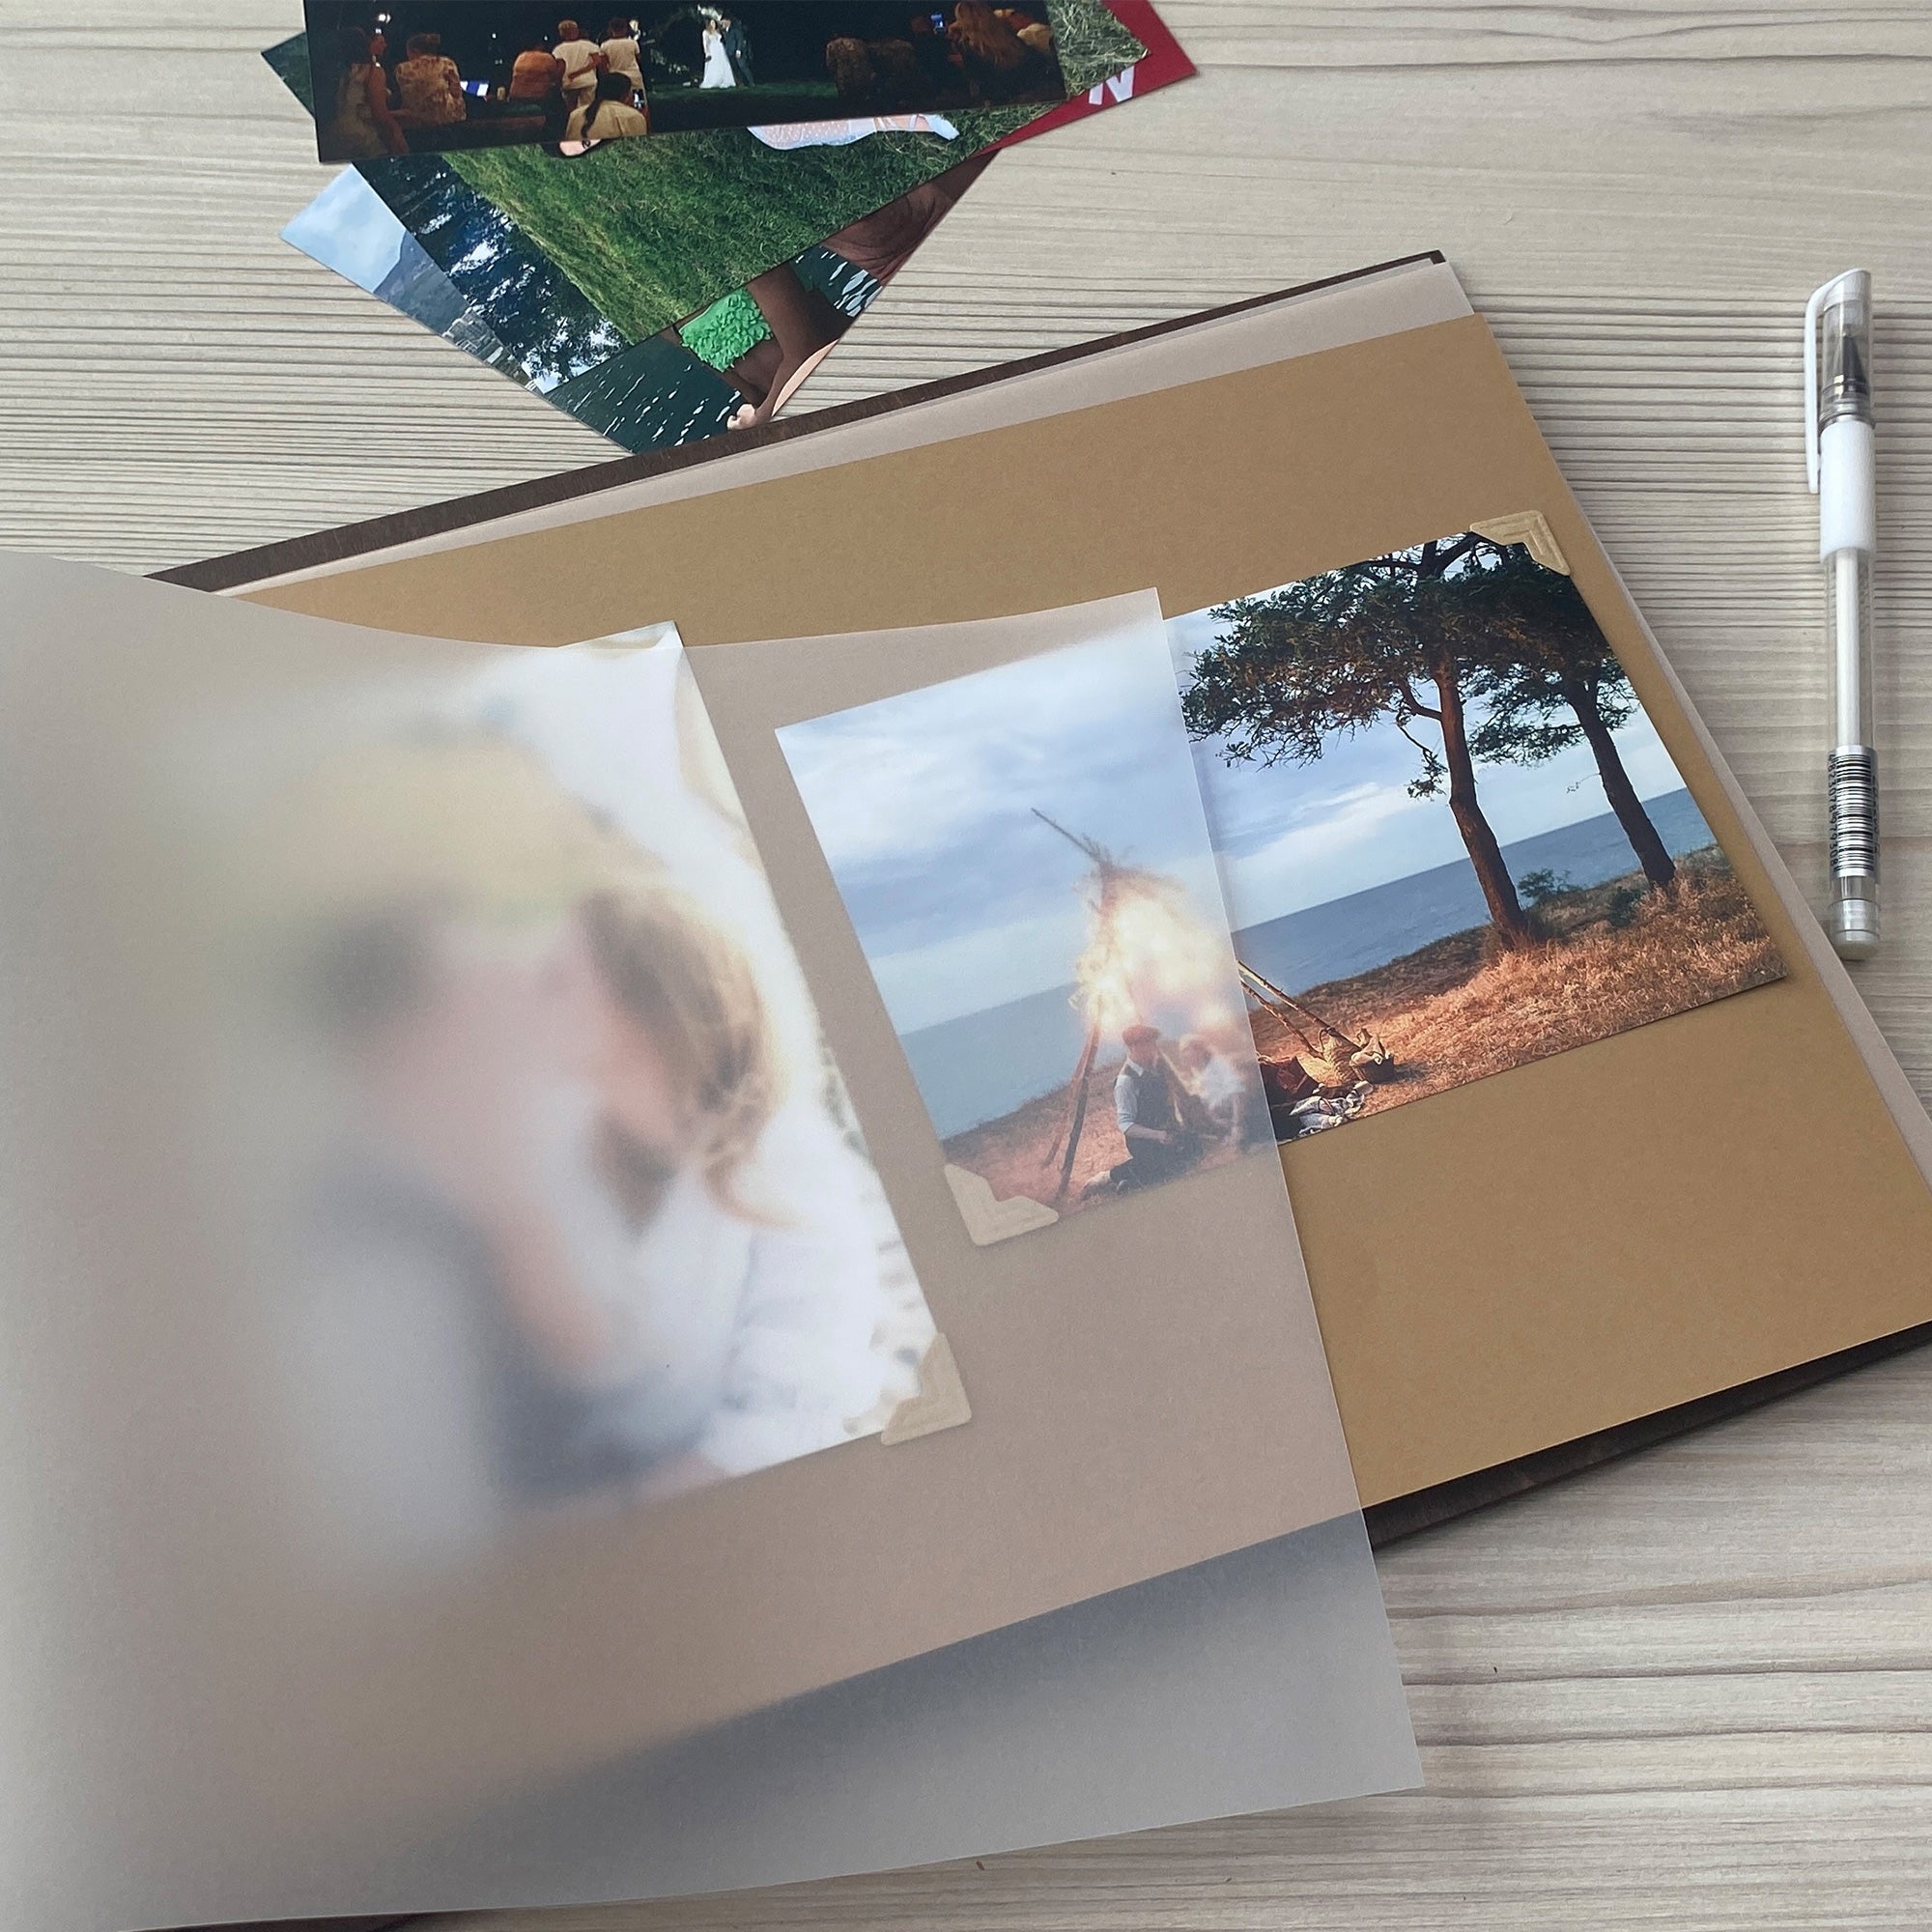 Personalized photo album cover and Geometric Heart map engraving